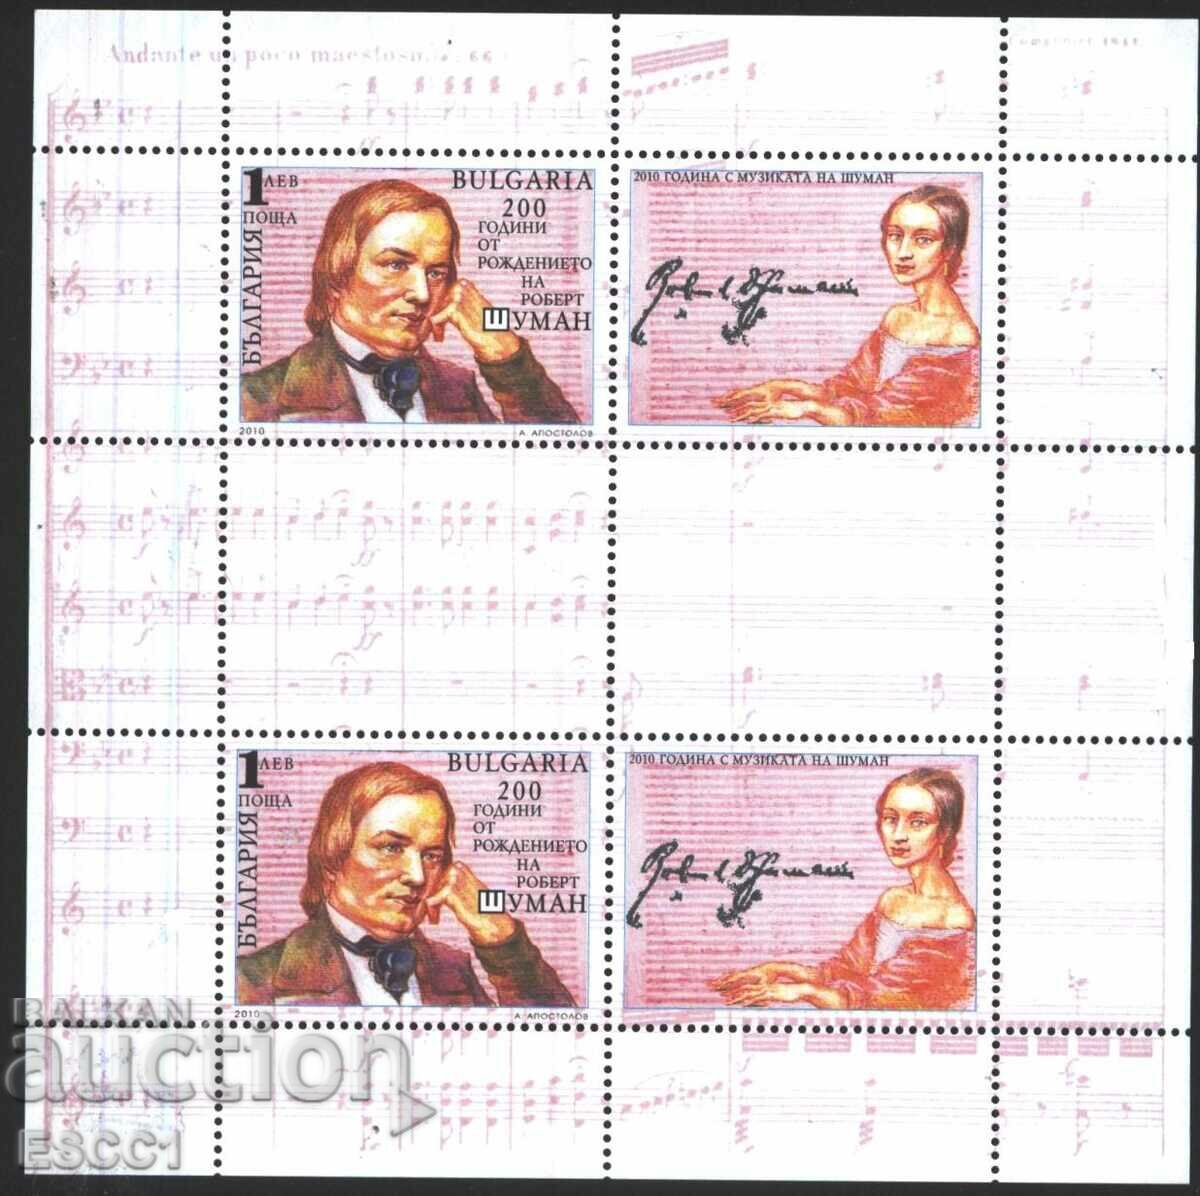 Clean stamp in a small sheet Robert Schuman 2010 from Bulgaria.